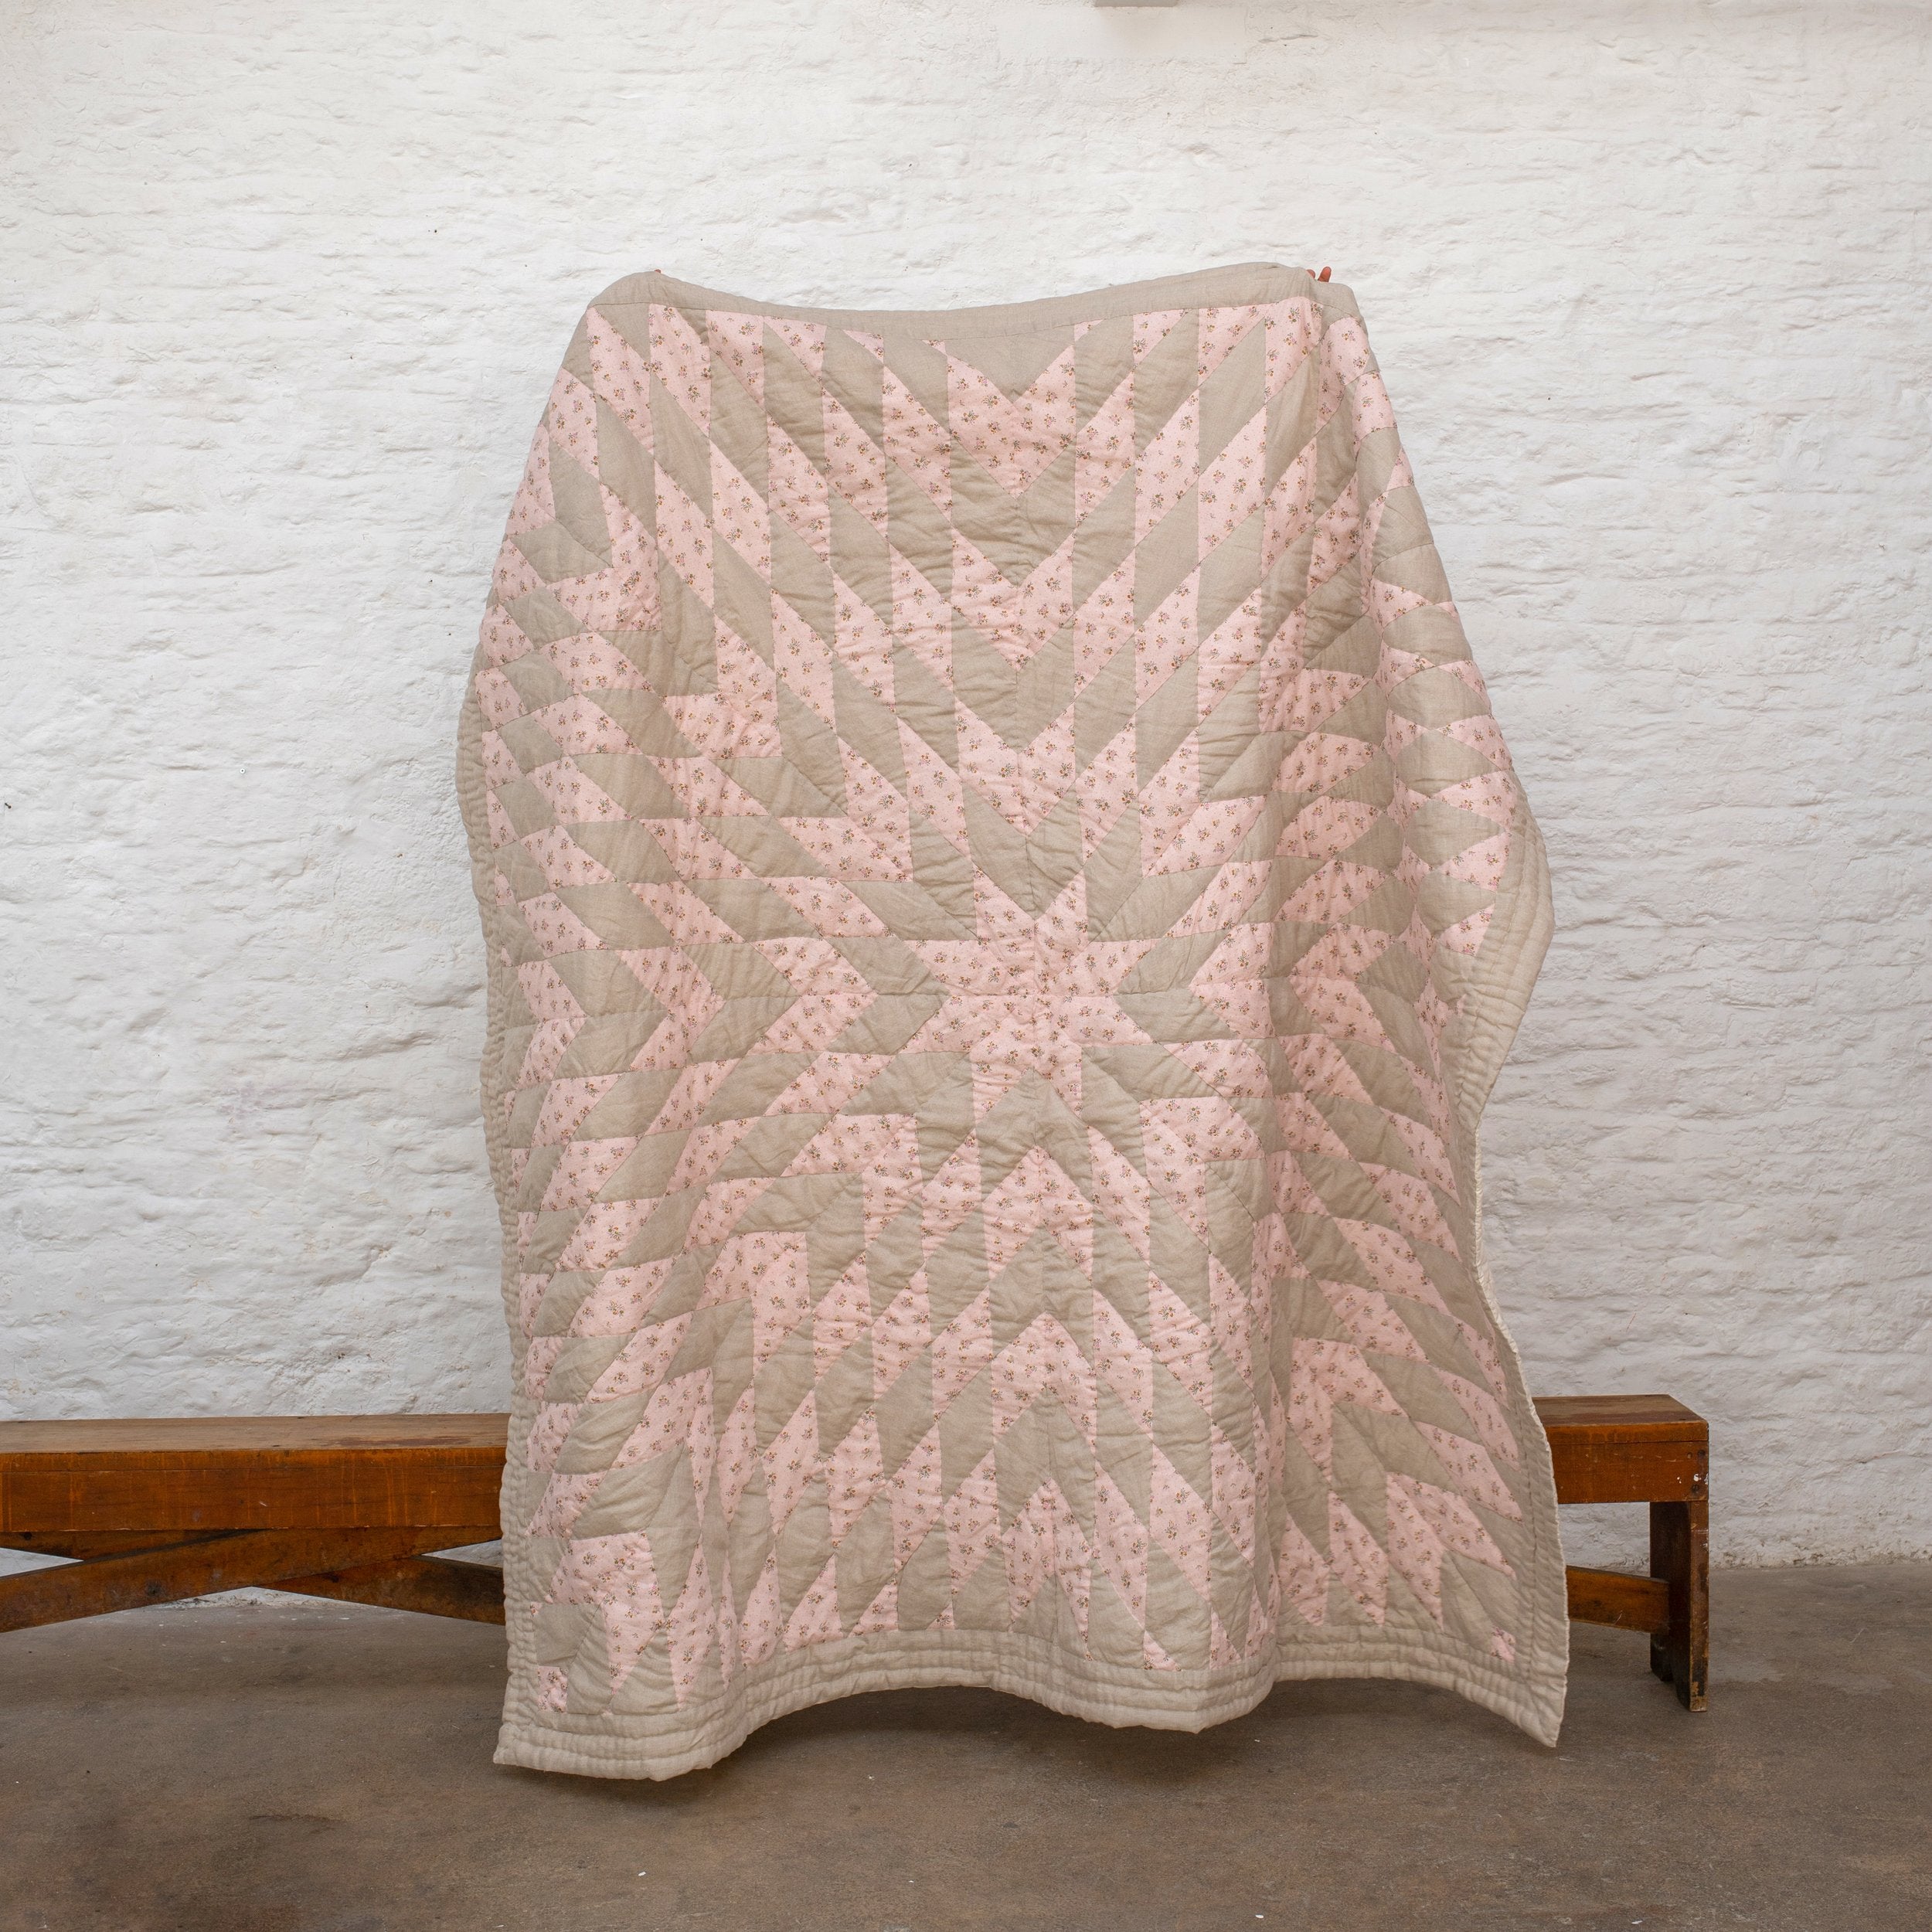 Peach and light brown quilt with diamond-shaped patchwork held up against a textured white wall.